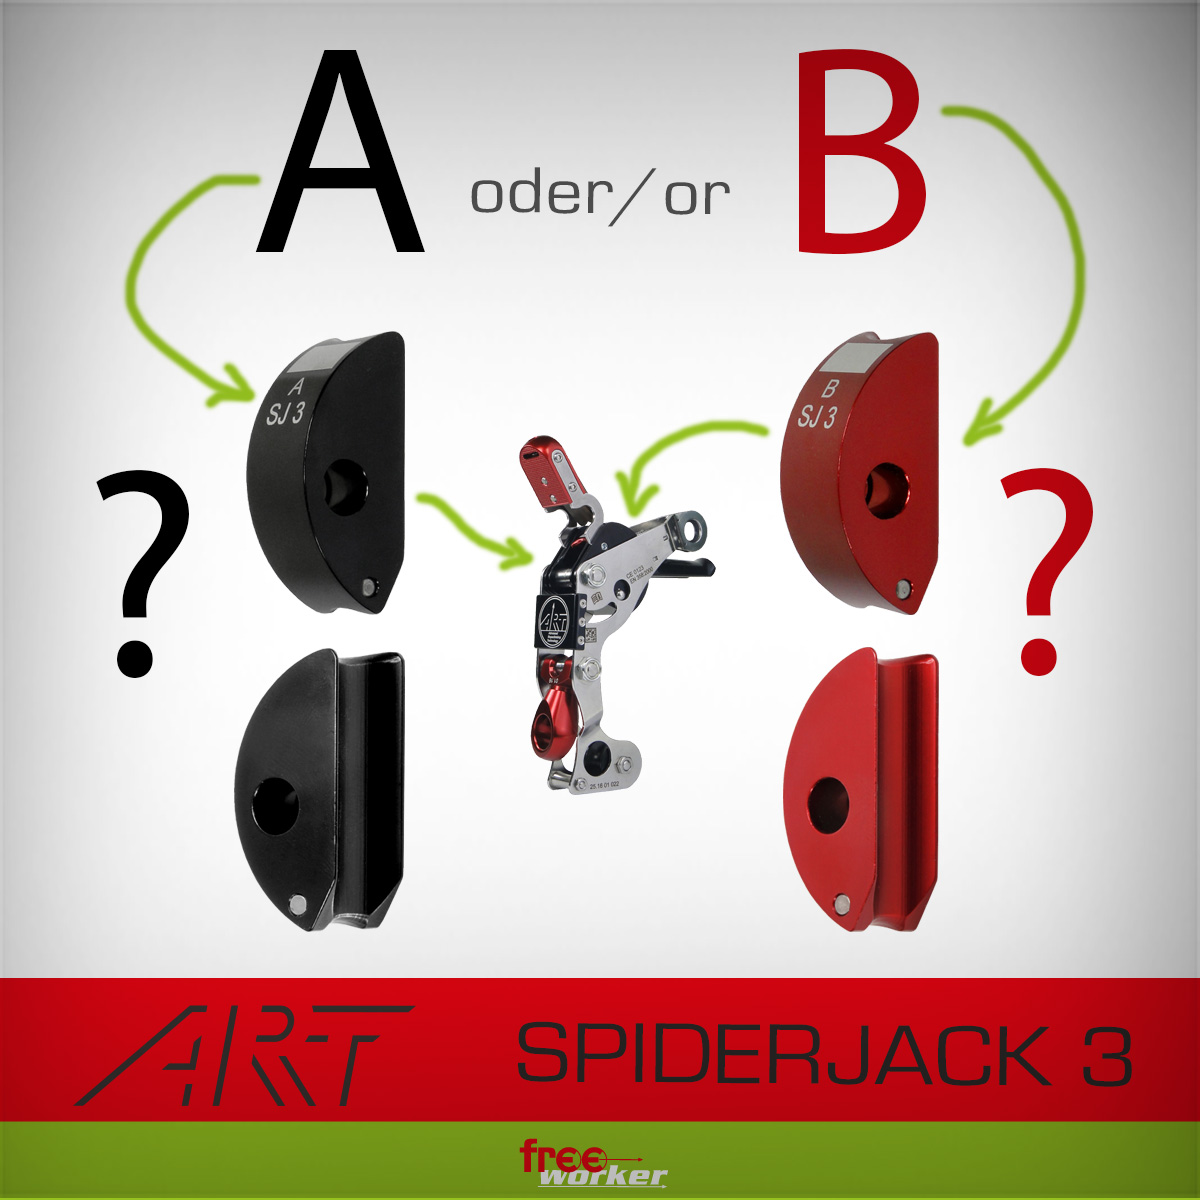 Clutch A oder B for the SpiderJack 3?